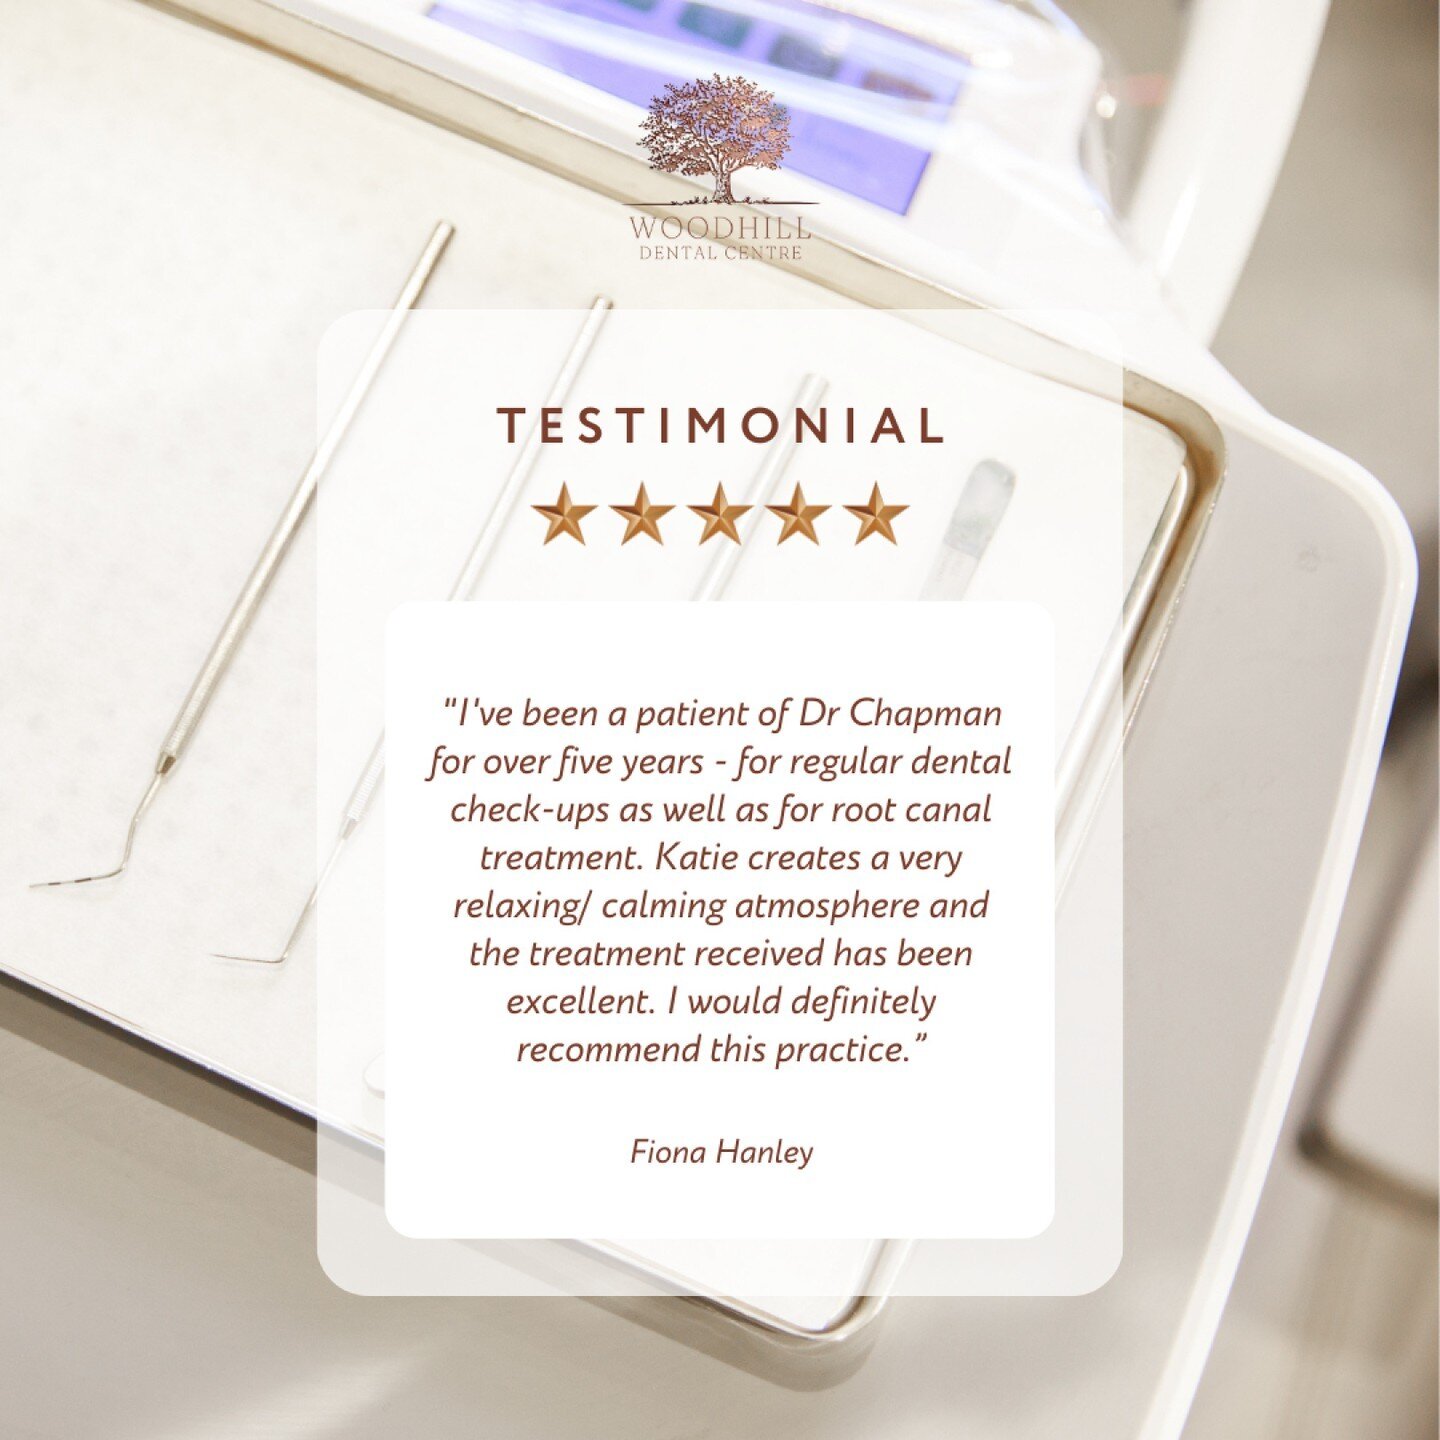 🌟🌟🌟🌟🌟 Thank you Fiona for being a loyal patient and trusting us with your dental care. We are so happy to hear that you had many positive experiences over the years!!